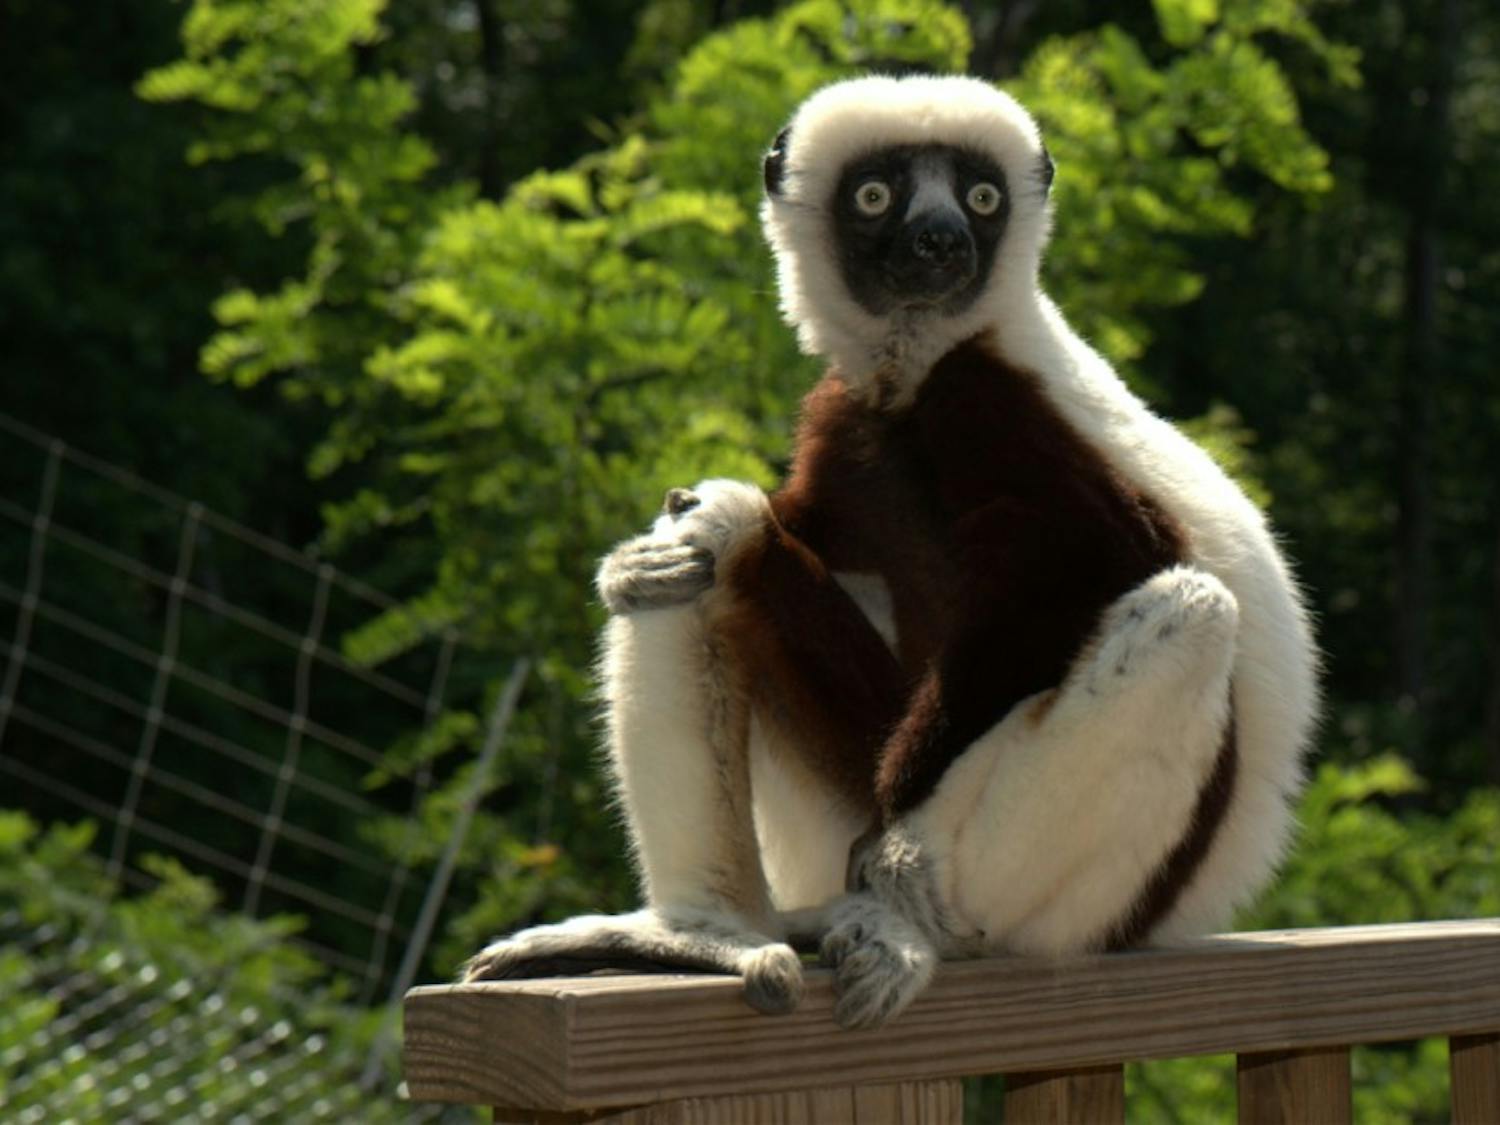 Jovian, pictured above, died at the age of 20 after starring as Zoboomafoo in the eponymous television show.